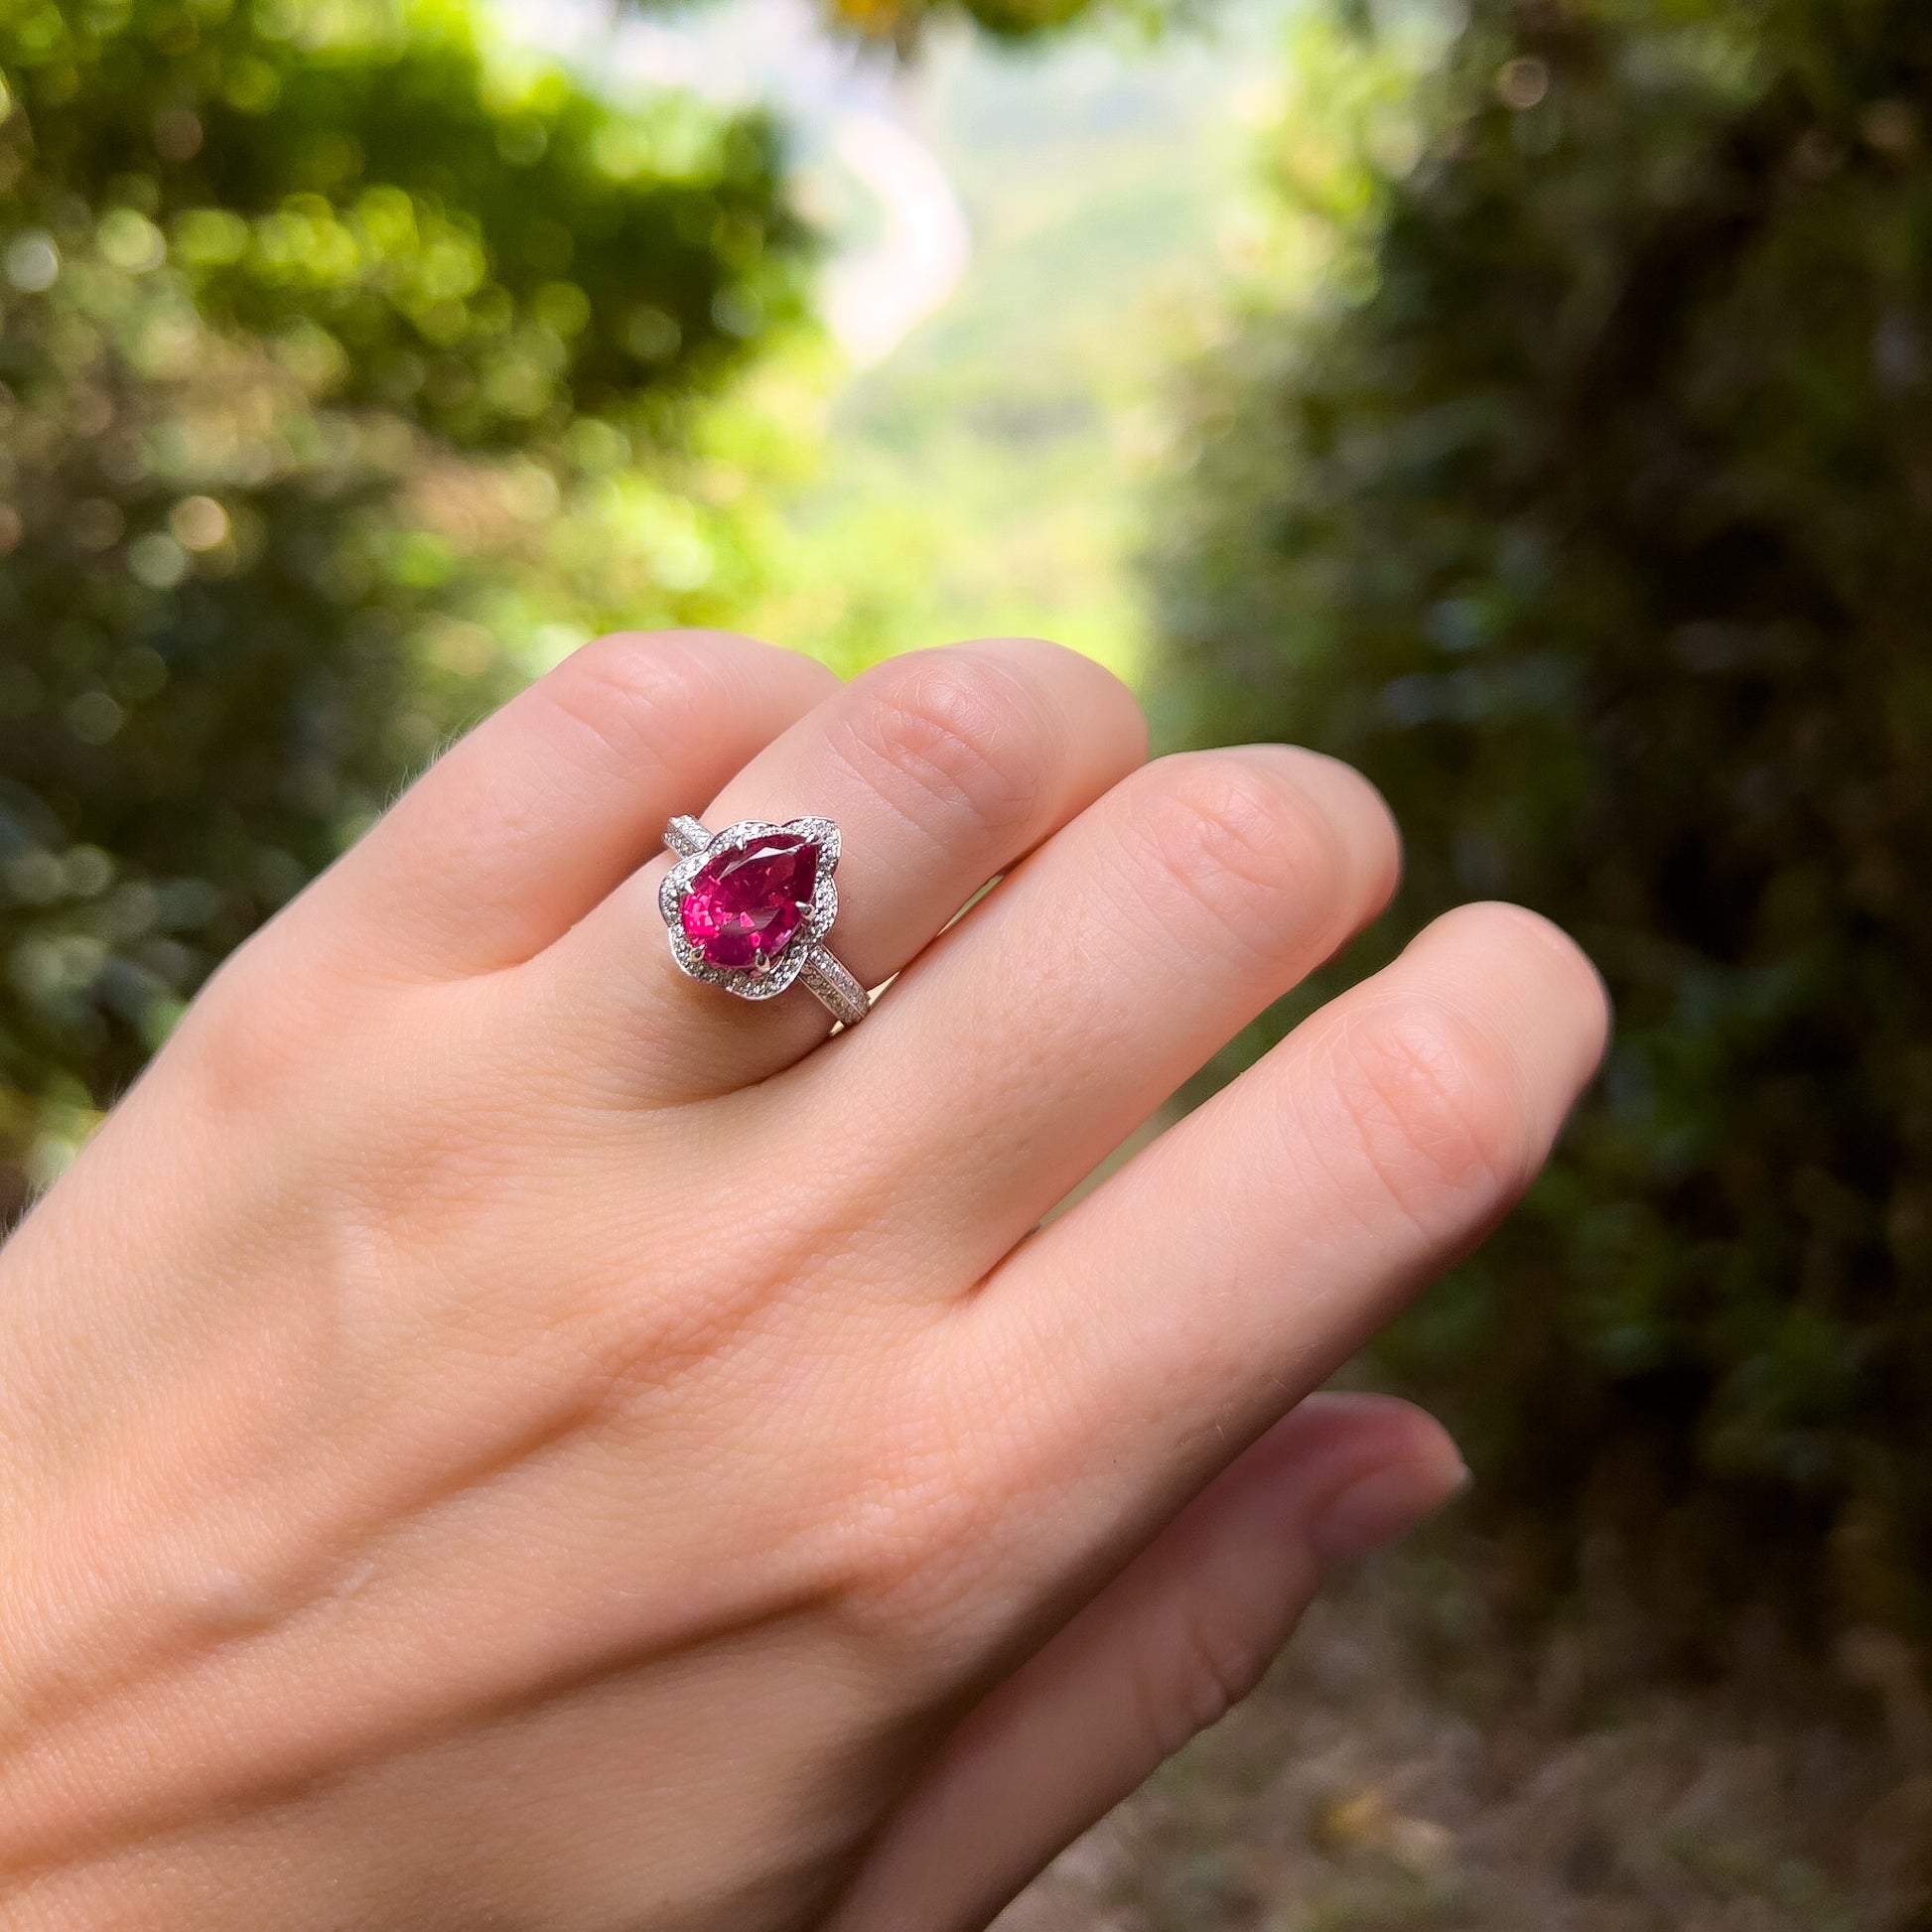 red spinel ring, red spinel and diamond ring, diamond cocktail ring, gemstone ring. white gold ring, engagement ring, hong kong jewellery, hong kong engagement ring. 红色尖晶石和钻石戒指 香港